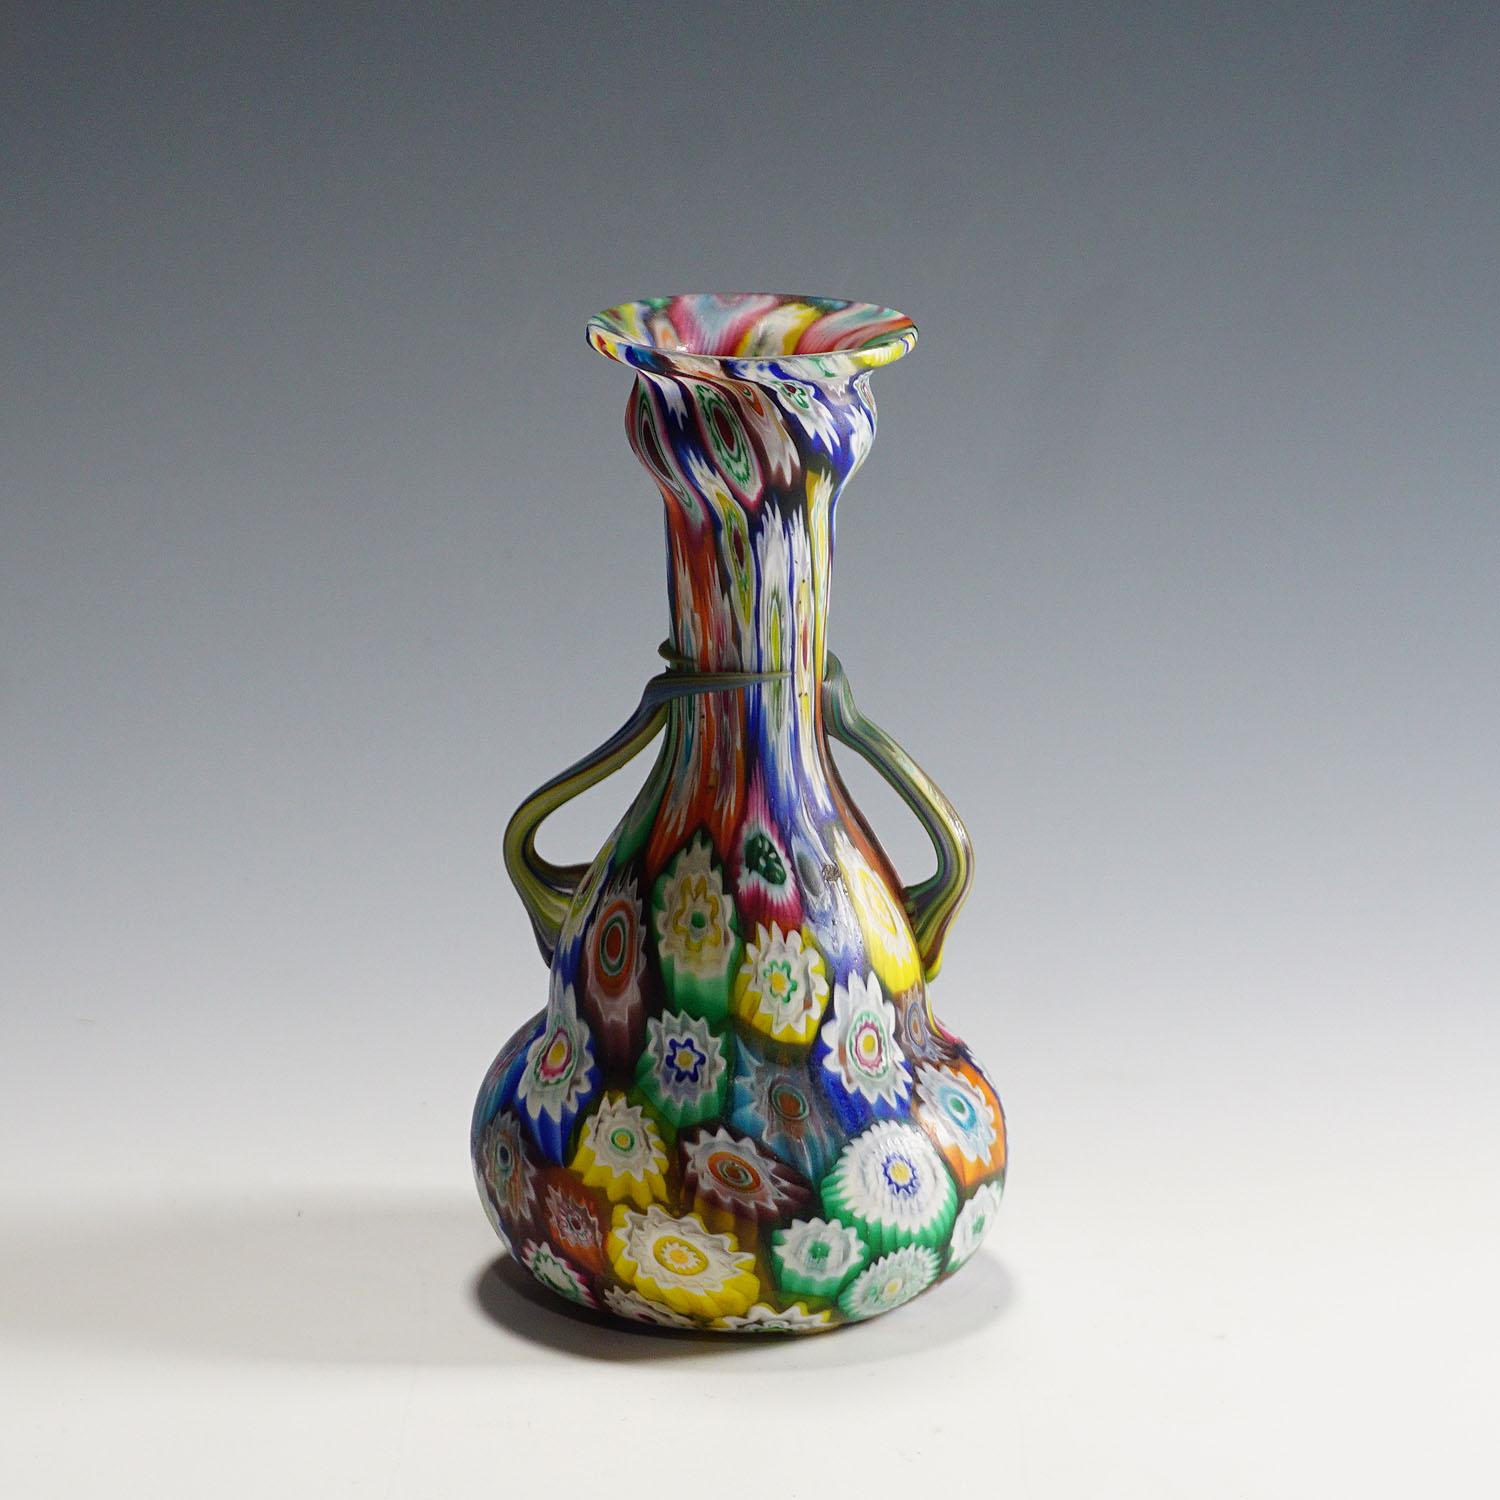 A very nice murrine glass vase, manufactured by Vetreria Fratelli Toso early 20th century. The vase is executed with polychrome multicorored millefiori murrines and has two handles. An authentic example of early 20th century Murano art glass which